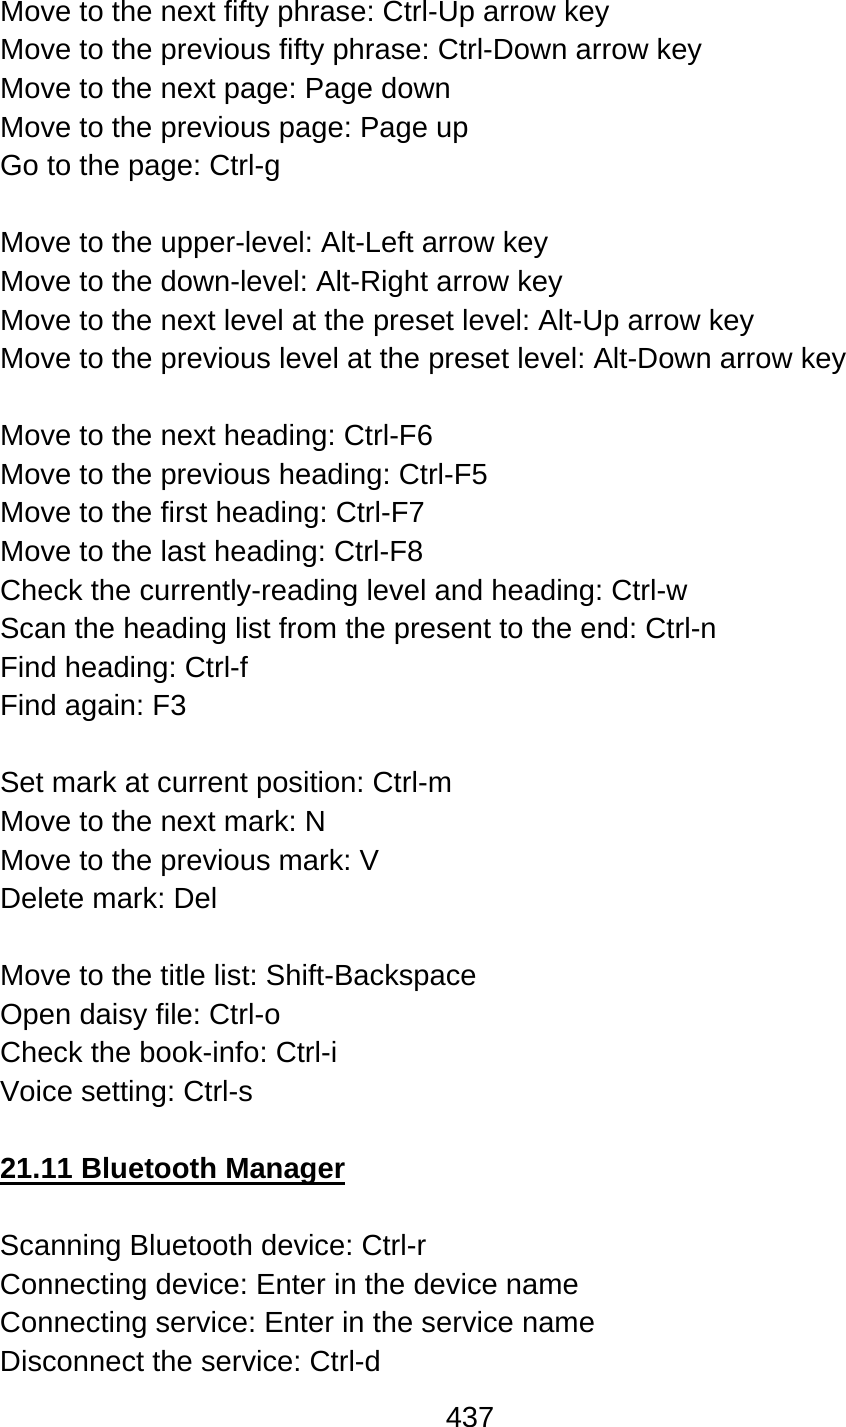 437  Move to the next fifty phrase: Ctrl-Up arrow key Move to the previous fifty phrase: Ctrl-Down arrow key Move to the next page: Page down Move to the previous page: Page up Go to the page: Ctrl-g  Move to the upper-level: Alt-Left arrow key Move to the down-level: Alt-Right arrow key Move to the next level at the preset level: Alt-Up arrow key Move to the previous level at the preset level: Alt-Down arrow key  Move to the next heading: Ctrl-F6 Move to the previous heading: Ctrl-F5 Move to the first heading: Ctrl-F7 Move to the last heading: Ctrl-F8 Check the currently-reading level and heading: Ctrl-w Scan the heading list from the present to the end: Ctrl-n Find heading: Ctrl-f Find again: F3  Set mark at current position: Ctrl-m Move to the next mark: N Move to the previous mark: V Delete mark: Del  Move to the title list: Shift-Backspace Open daisy file: Ctrl-o Check the book-info: Ctrl-i Voice setting: Ctrl-s  21.11 Bluetooth Manager  Scanning Bluetooth device: Ctrl-r Connecting device: Enter in the device name Connecting service: Enter in the service name Disconnect the service: Ctrl-d 